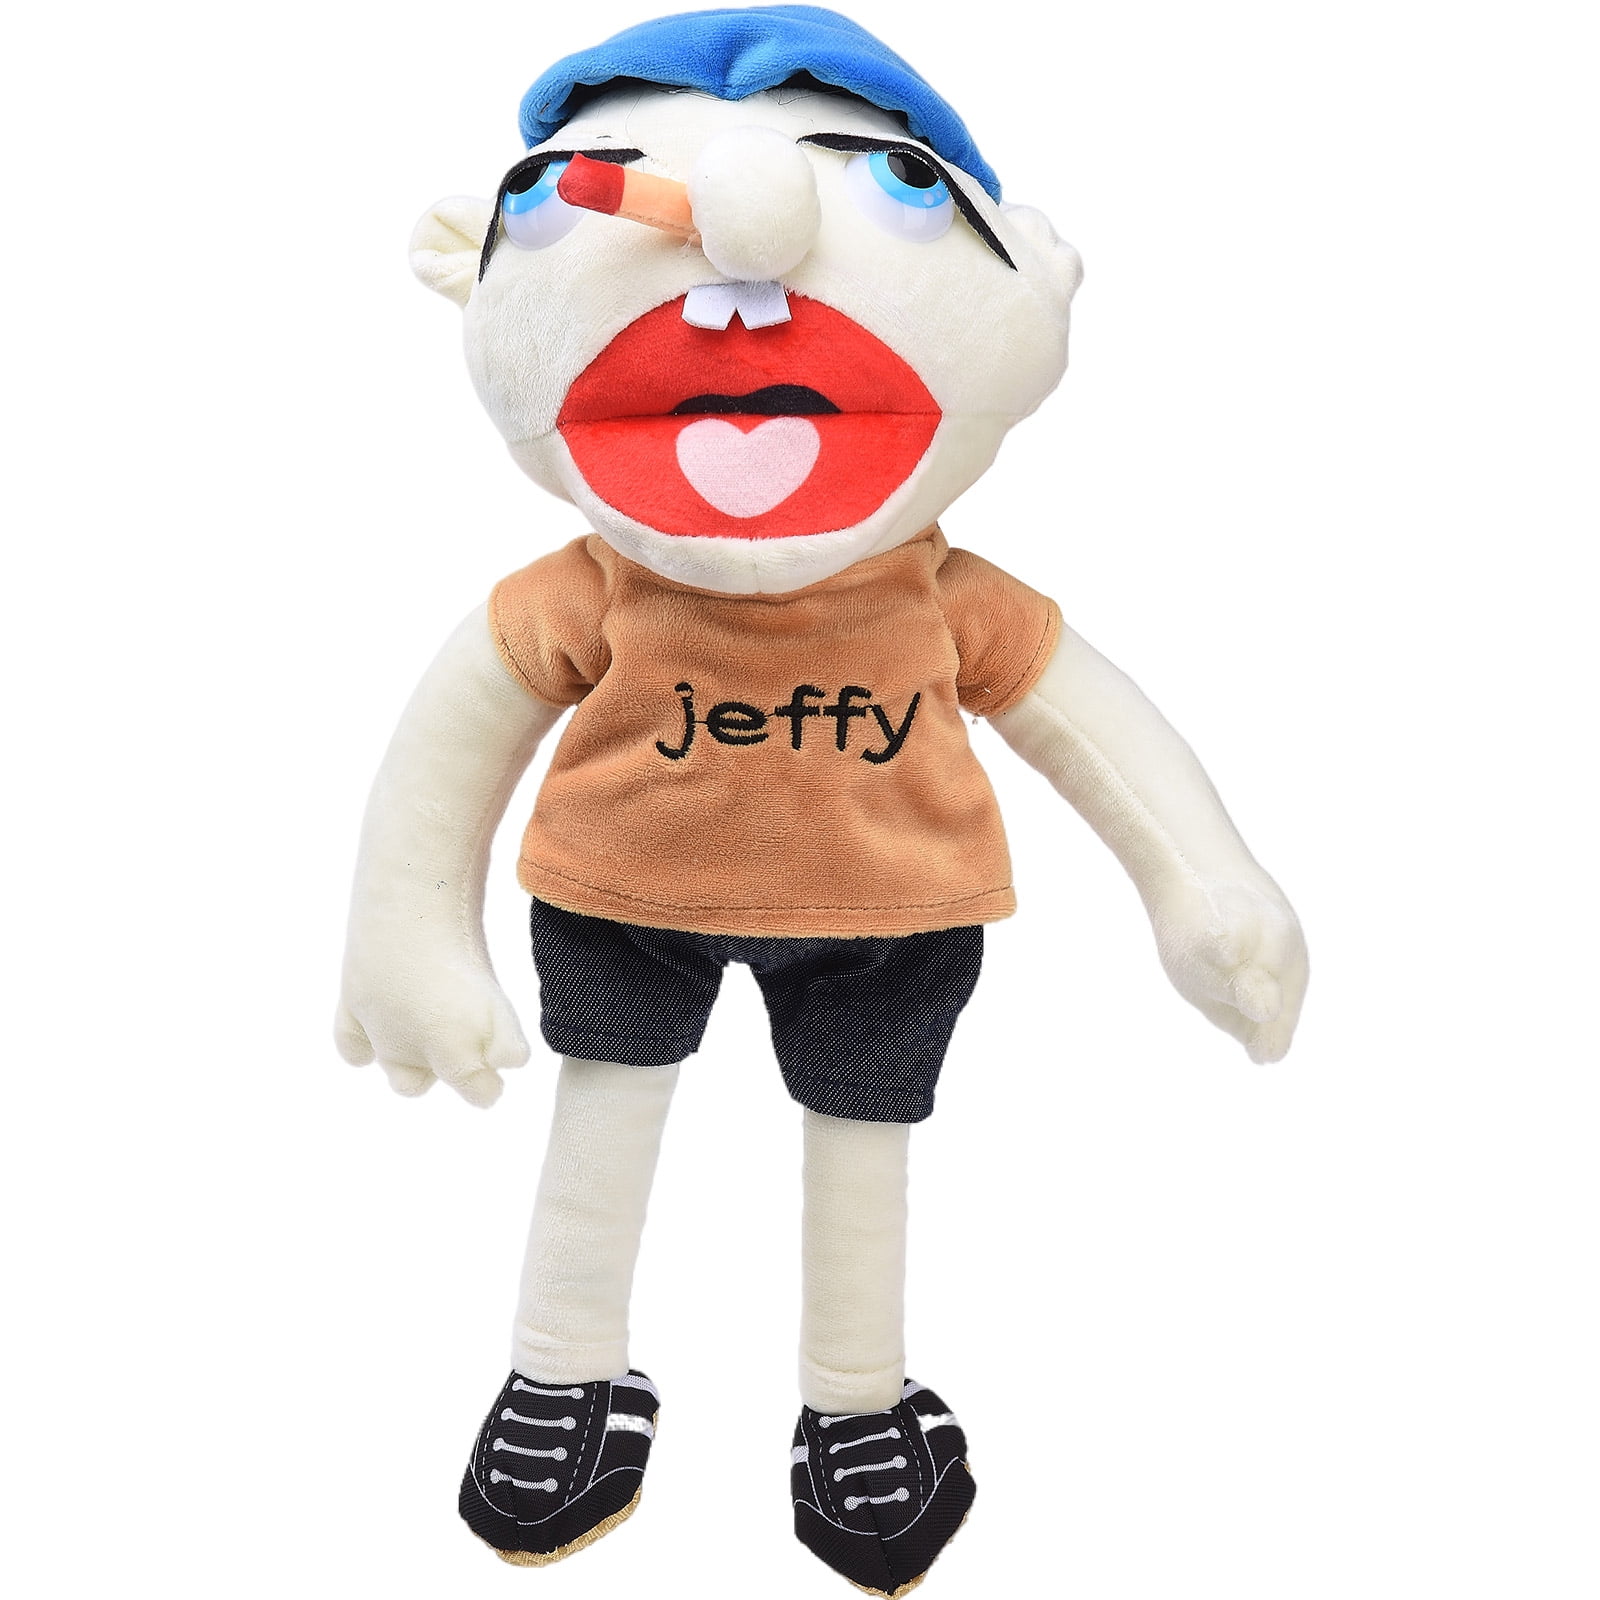 Jeffy Puppet Plush Toy Doll, 60cm Hand Puppet,Mischievous Funny